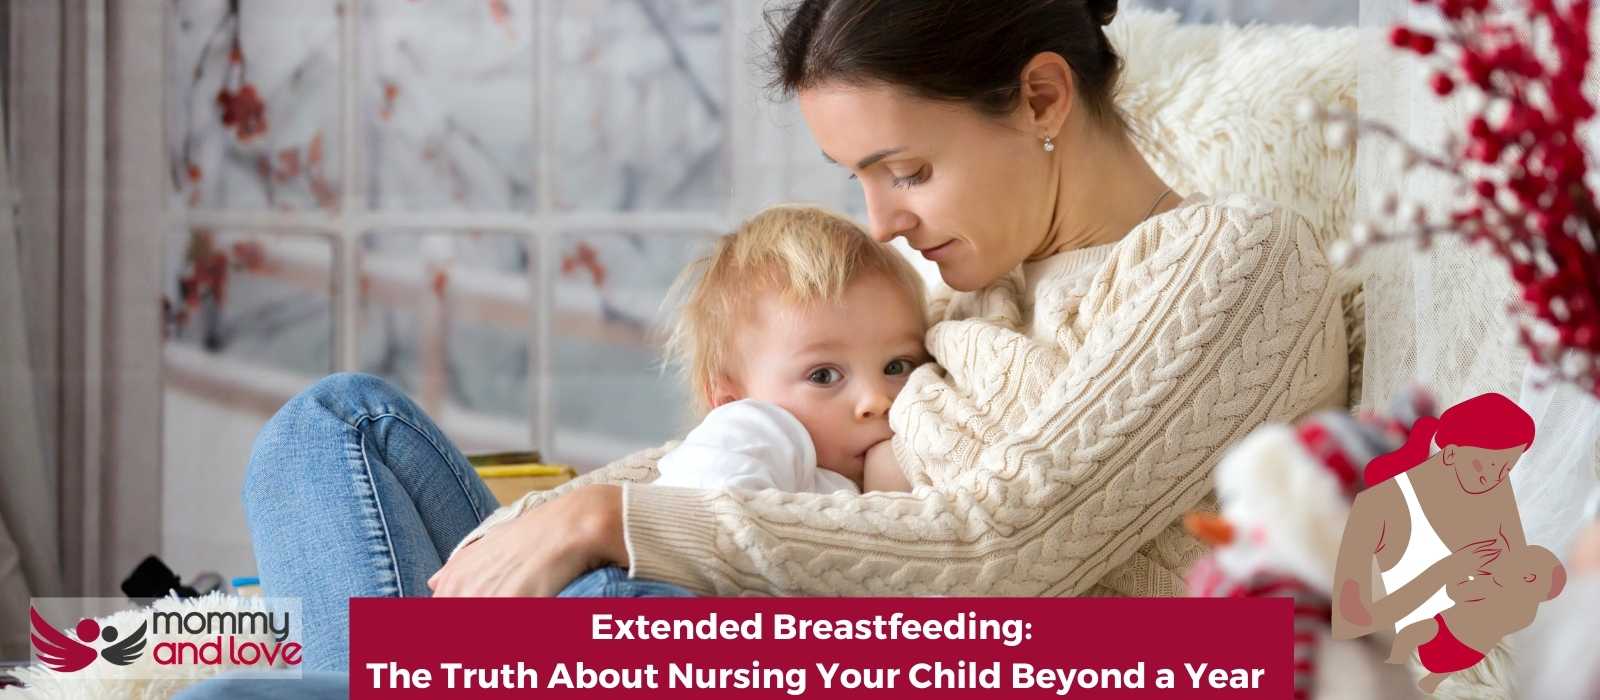 Extended Breastfeeding The Truth About Nursing Your Child Beyond a Year